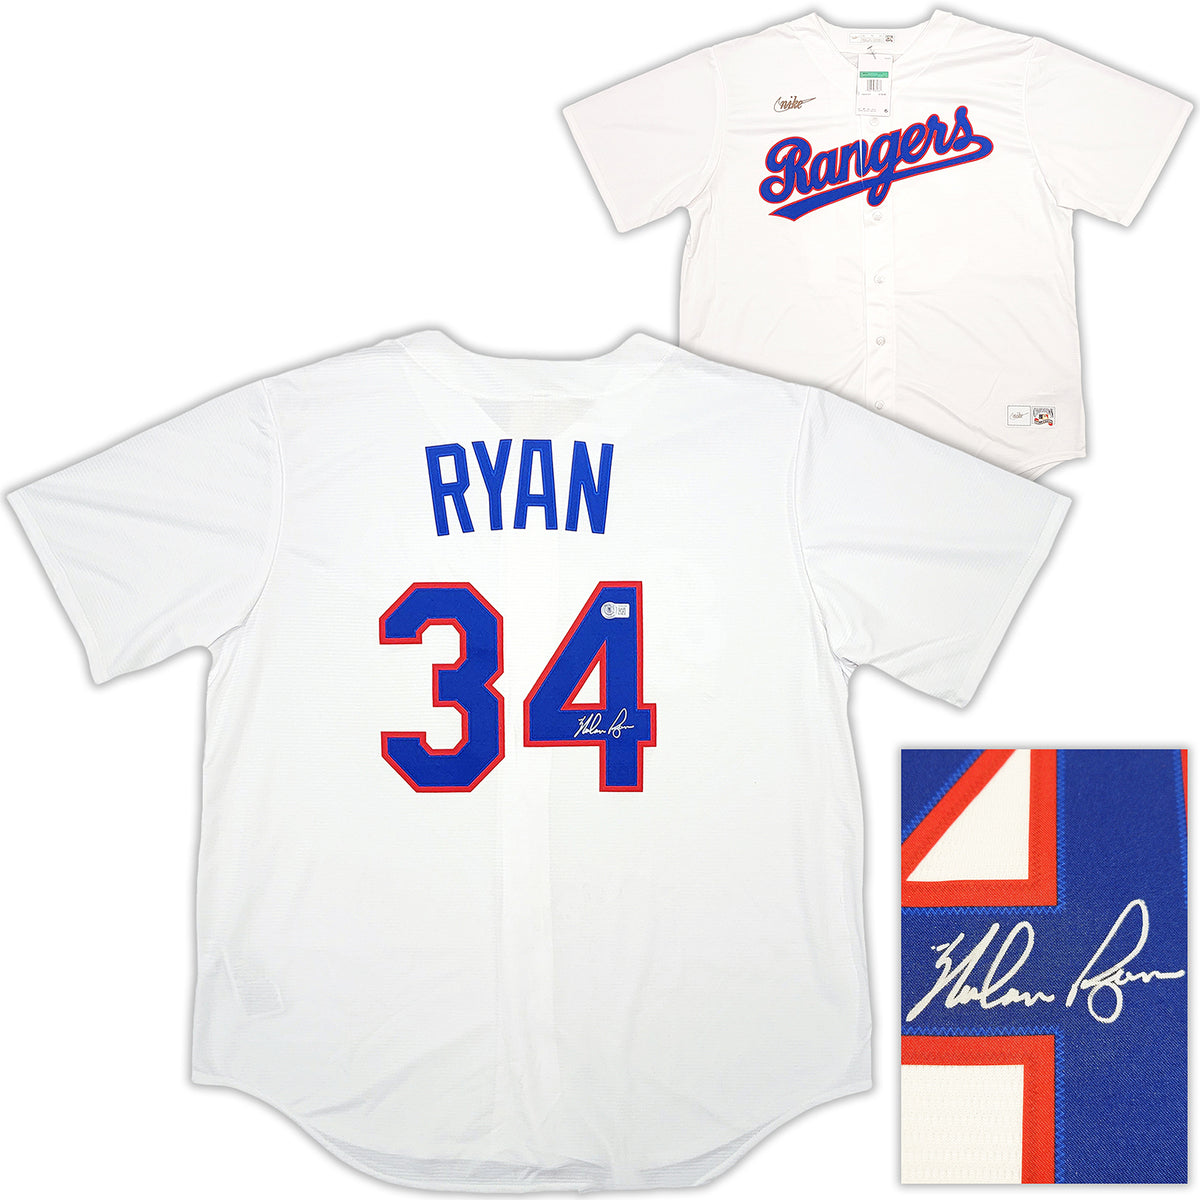 Nolan Ryan Signed Texas Rangers Nike Cooperstown Collection Jersey